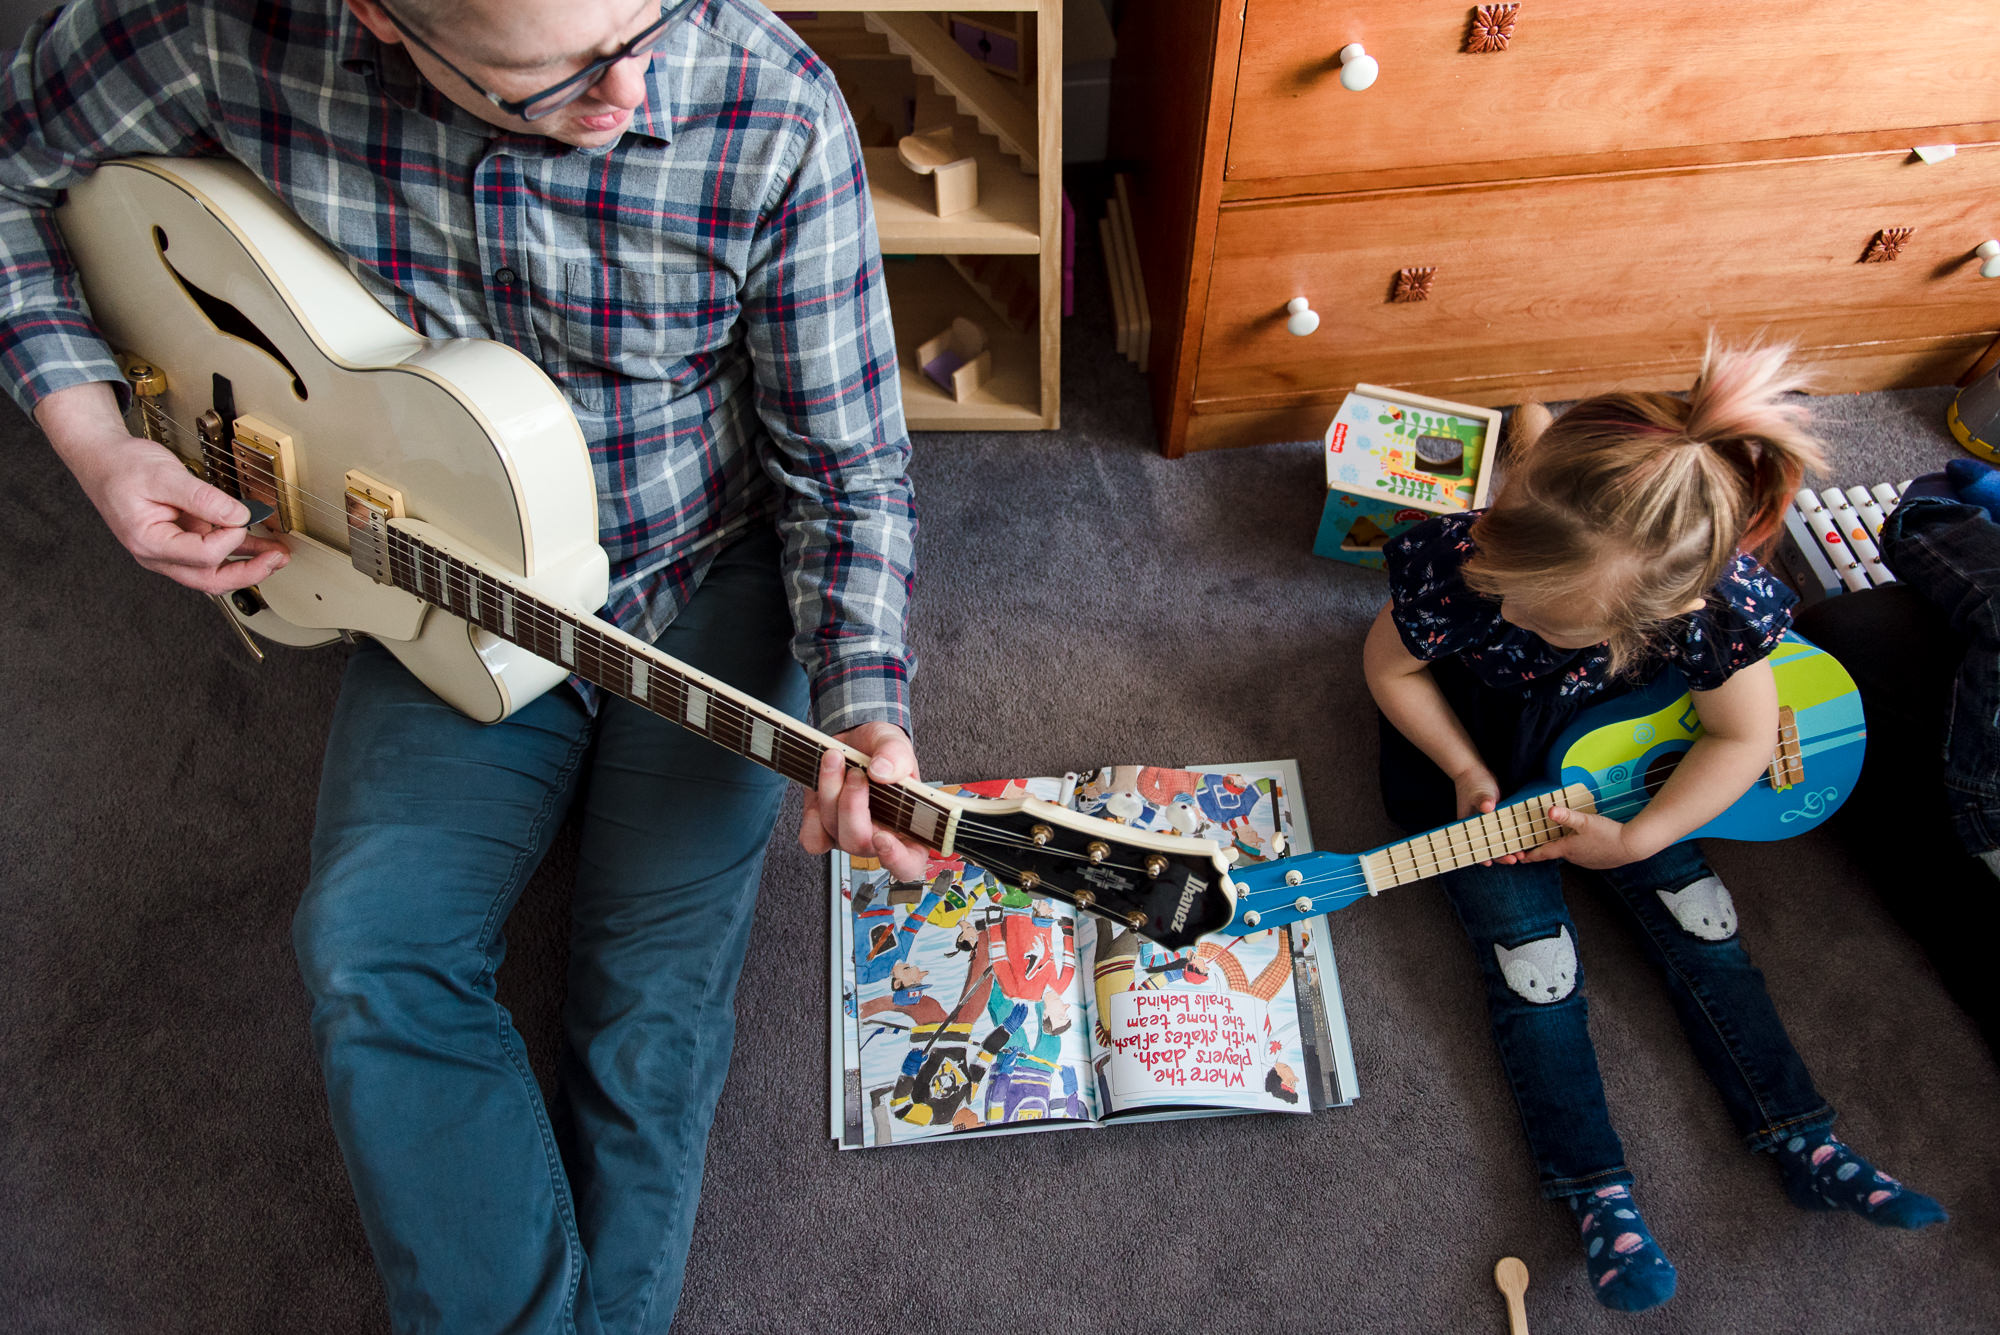 A Dad plays music with his young daughter as part of a family photo session in their Edmonton home. 